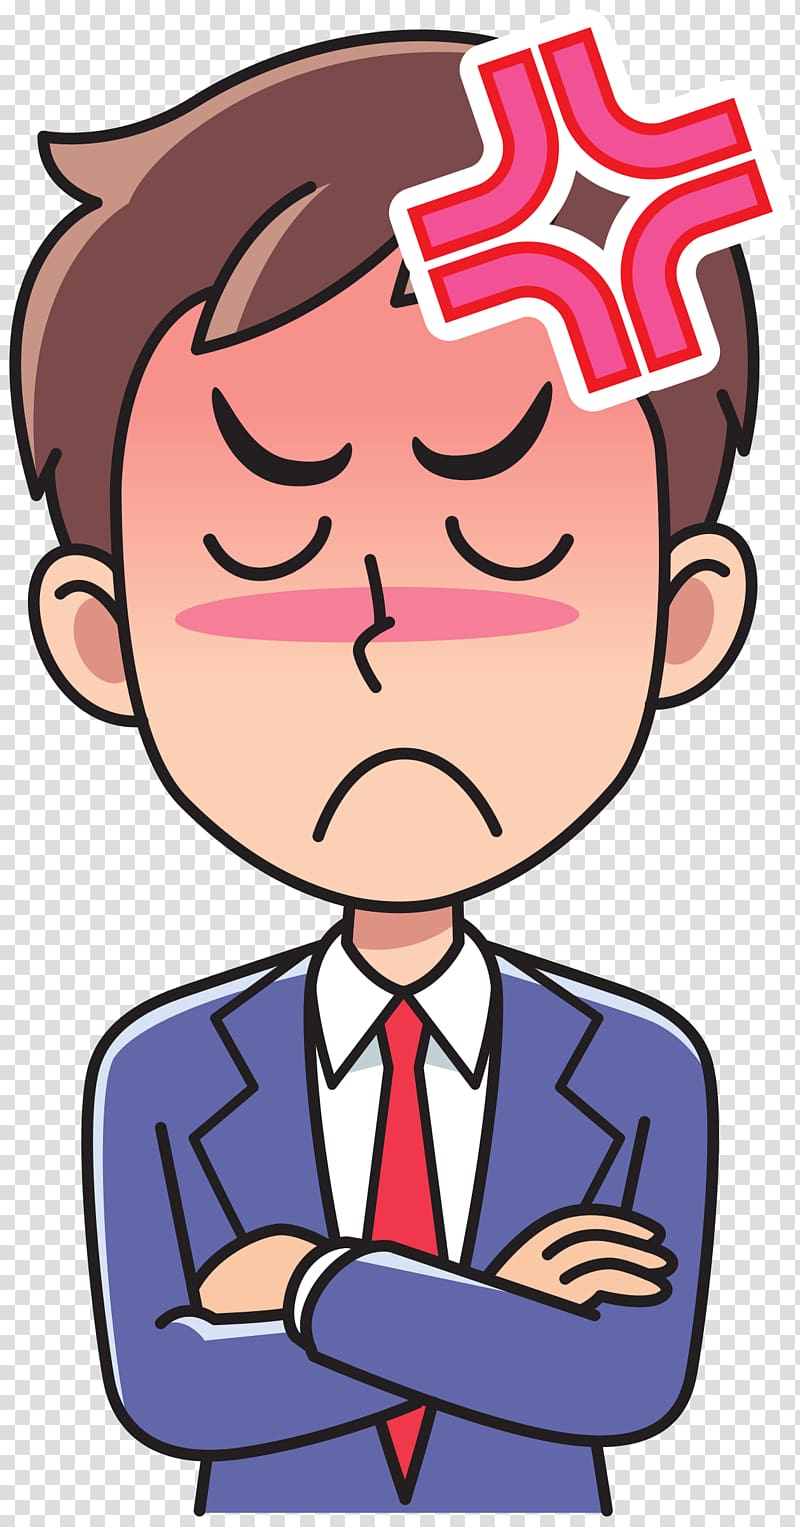 angry worker clipart